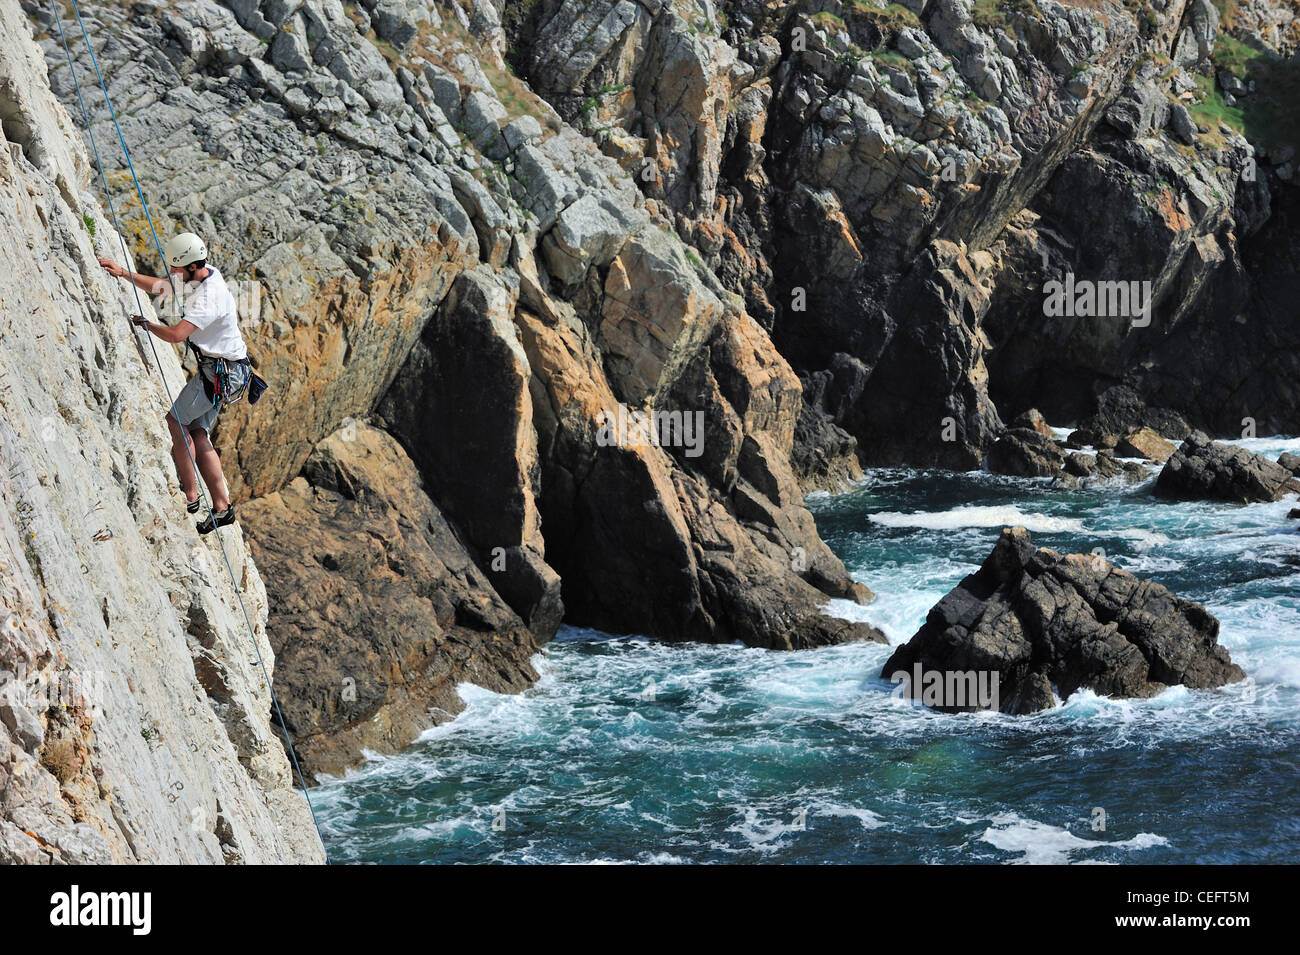 Rock climber climbing cliff face at the pointe de Pen-Hir, Finistère, Brittany, France Stock Photo